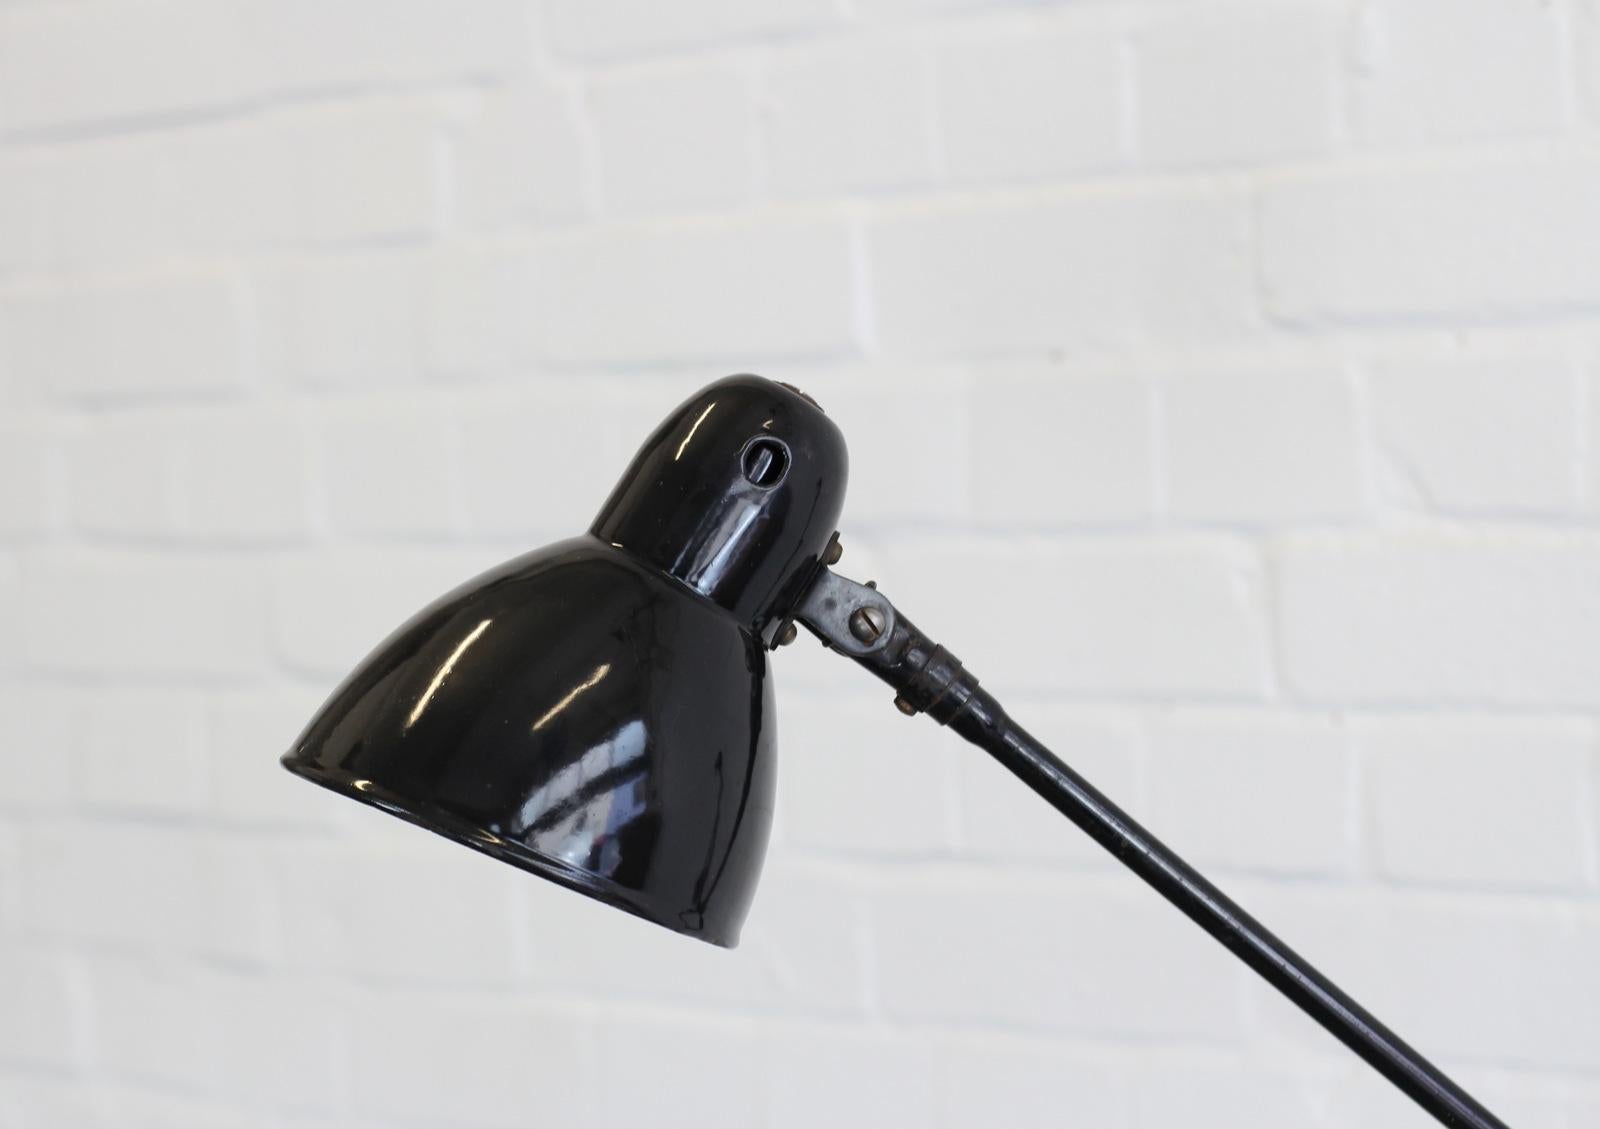 Wall-mounted task lamp by Jacobus, circa 1930s

- Vitreous black enamel shade
- 3 articulated arms
- Takes E27 fitting bulbs
- Inline switch near the wall mount
- German, circa 1930s
- Shade measures 15cm wide
- Extends up to 125cm from the